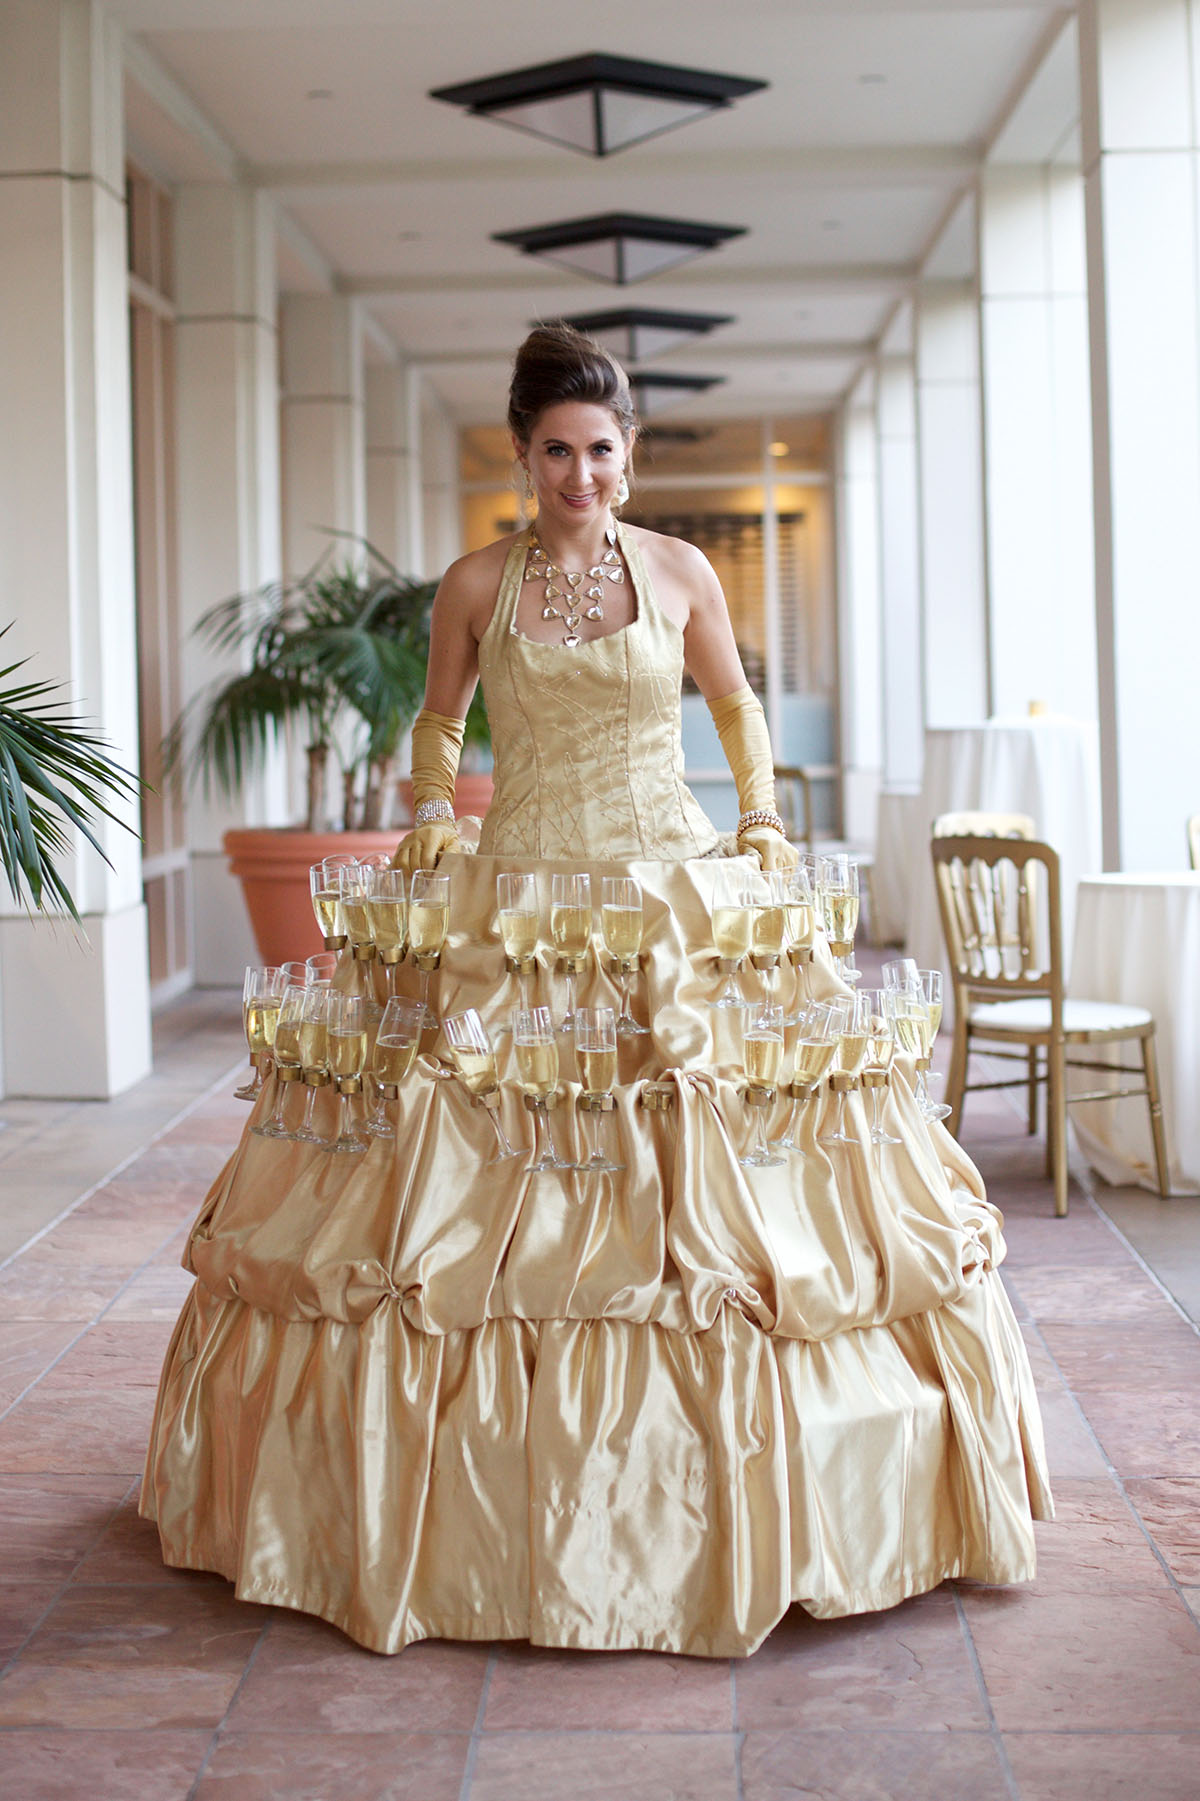 You'll want to a be a guest at this couple's Beauty and the Beast inspired wedding Belle